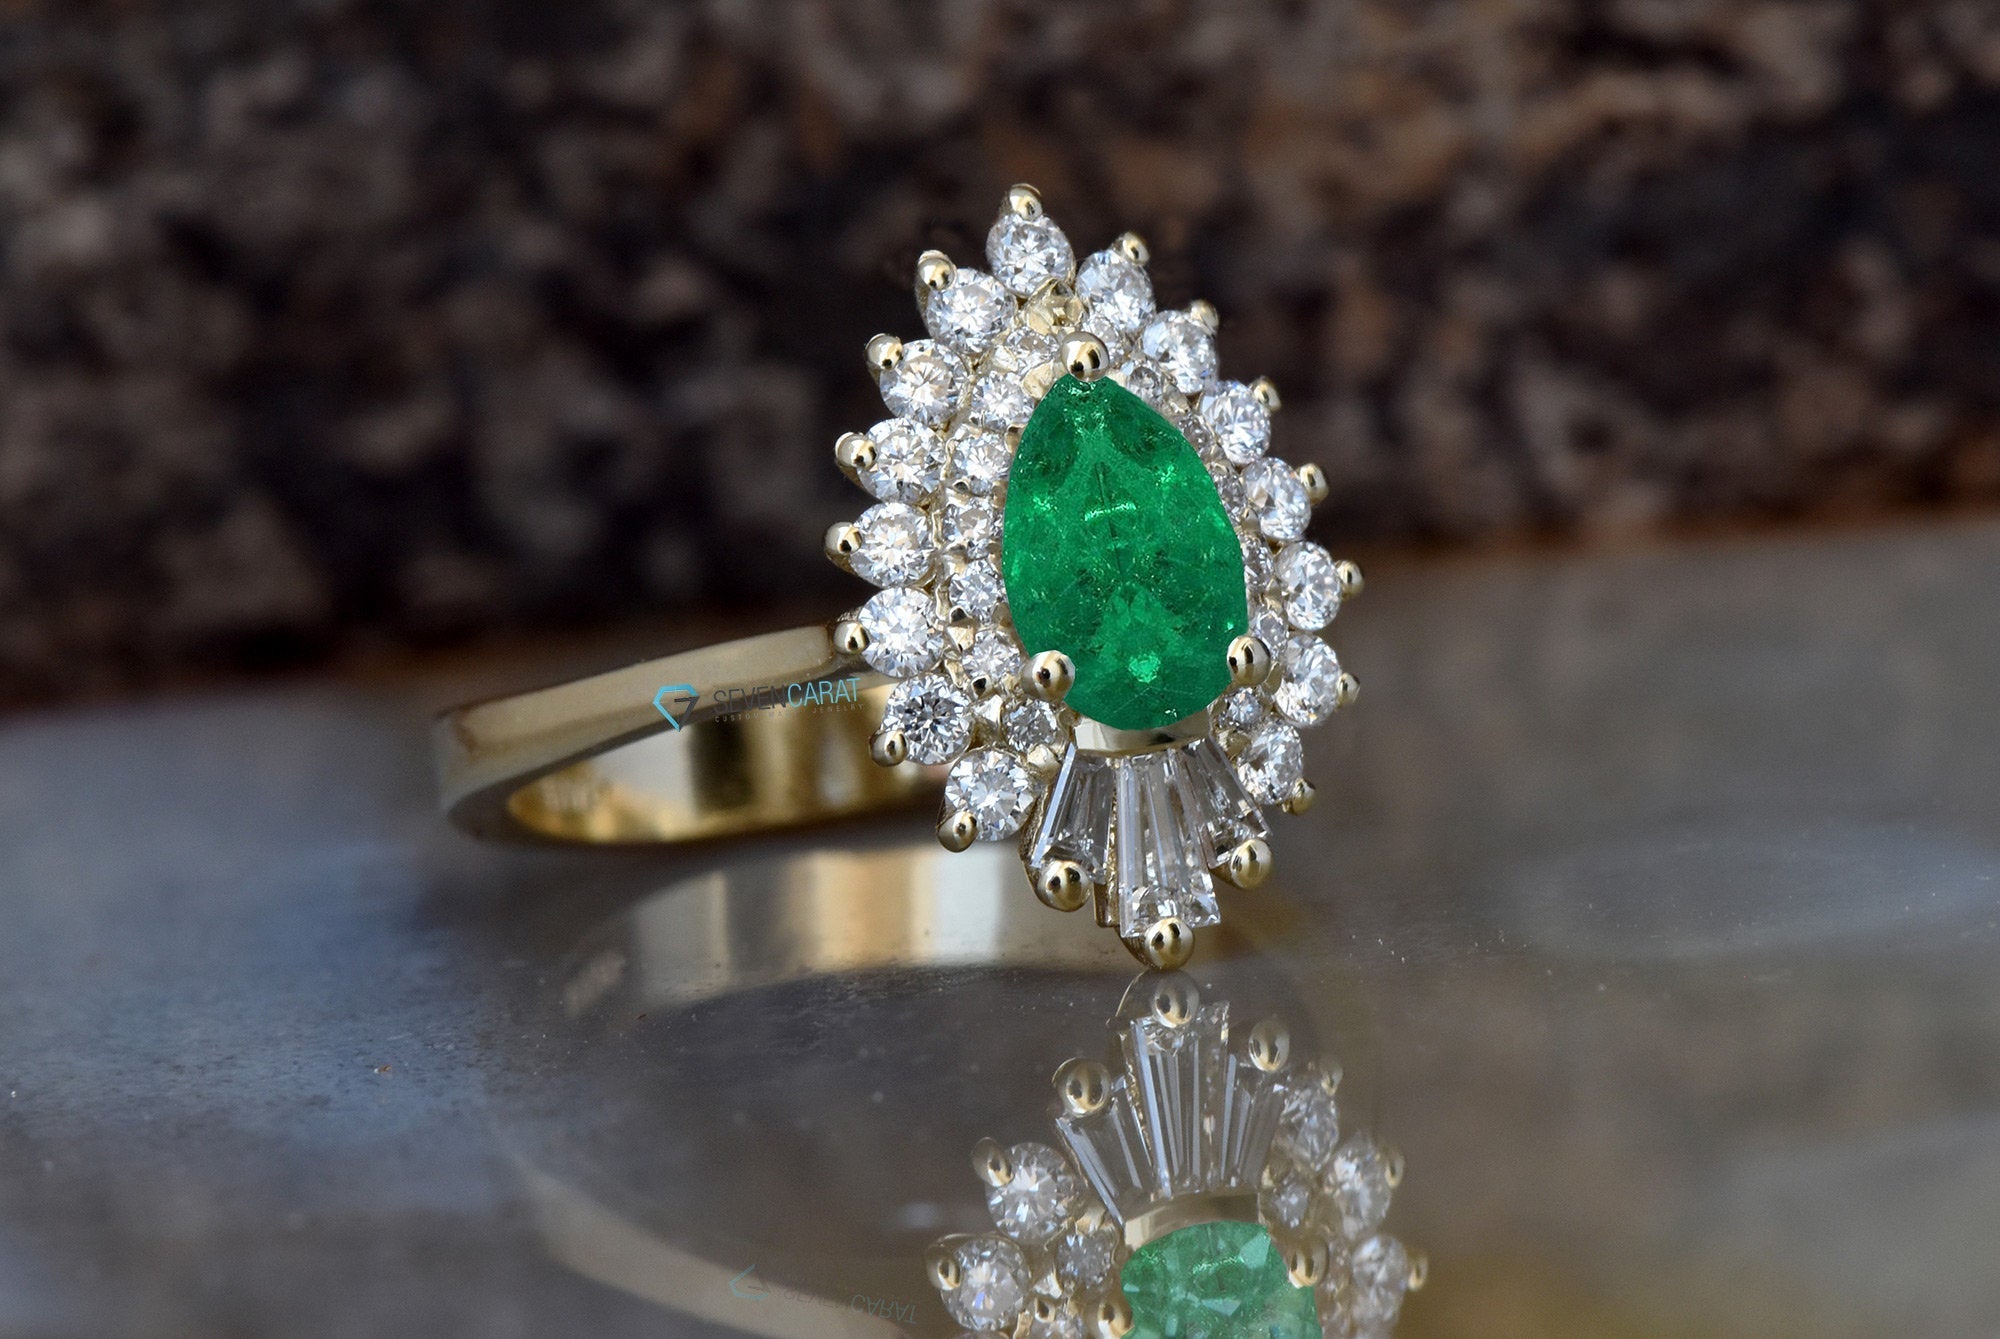 Are Engagement Rings from the 1920s still popular today? – SevenCarat